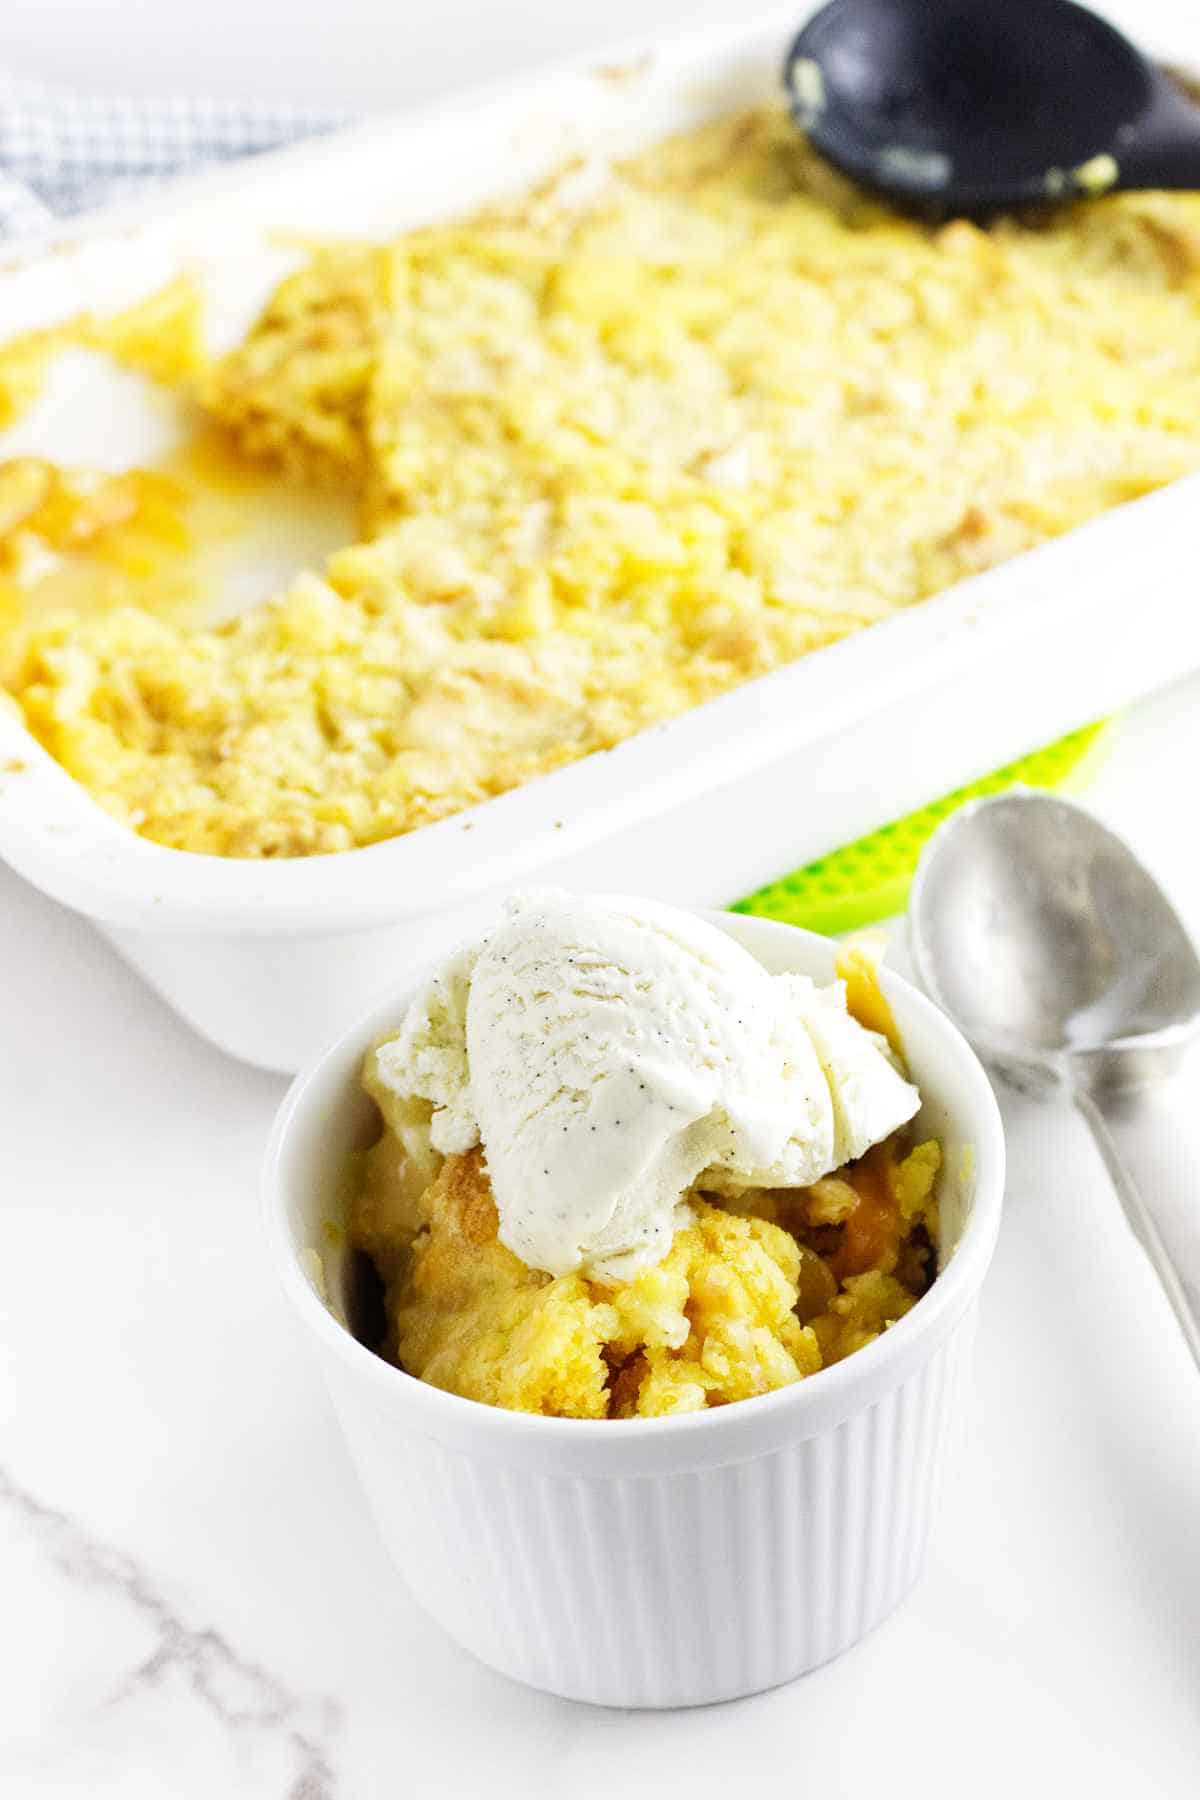 serving of peach dump cake with ice cream on top and baking dish in background.